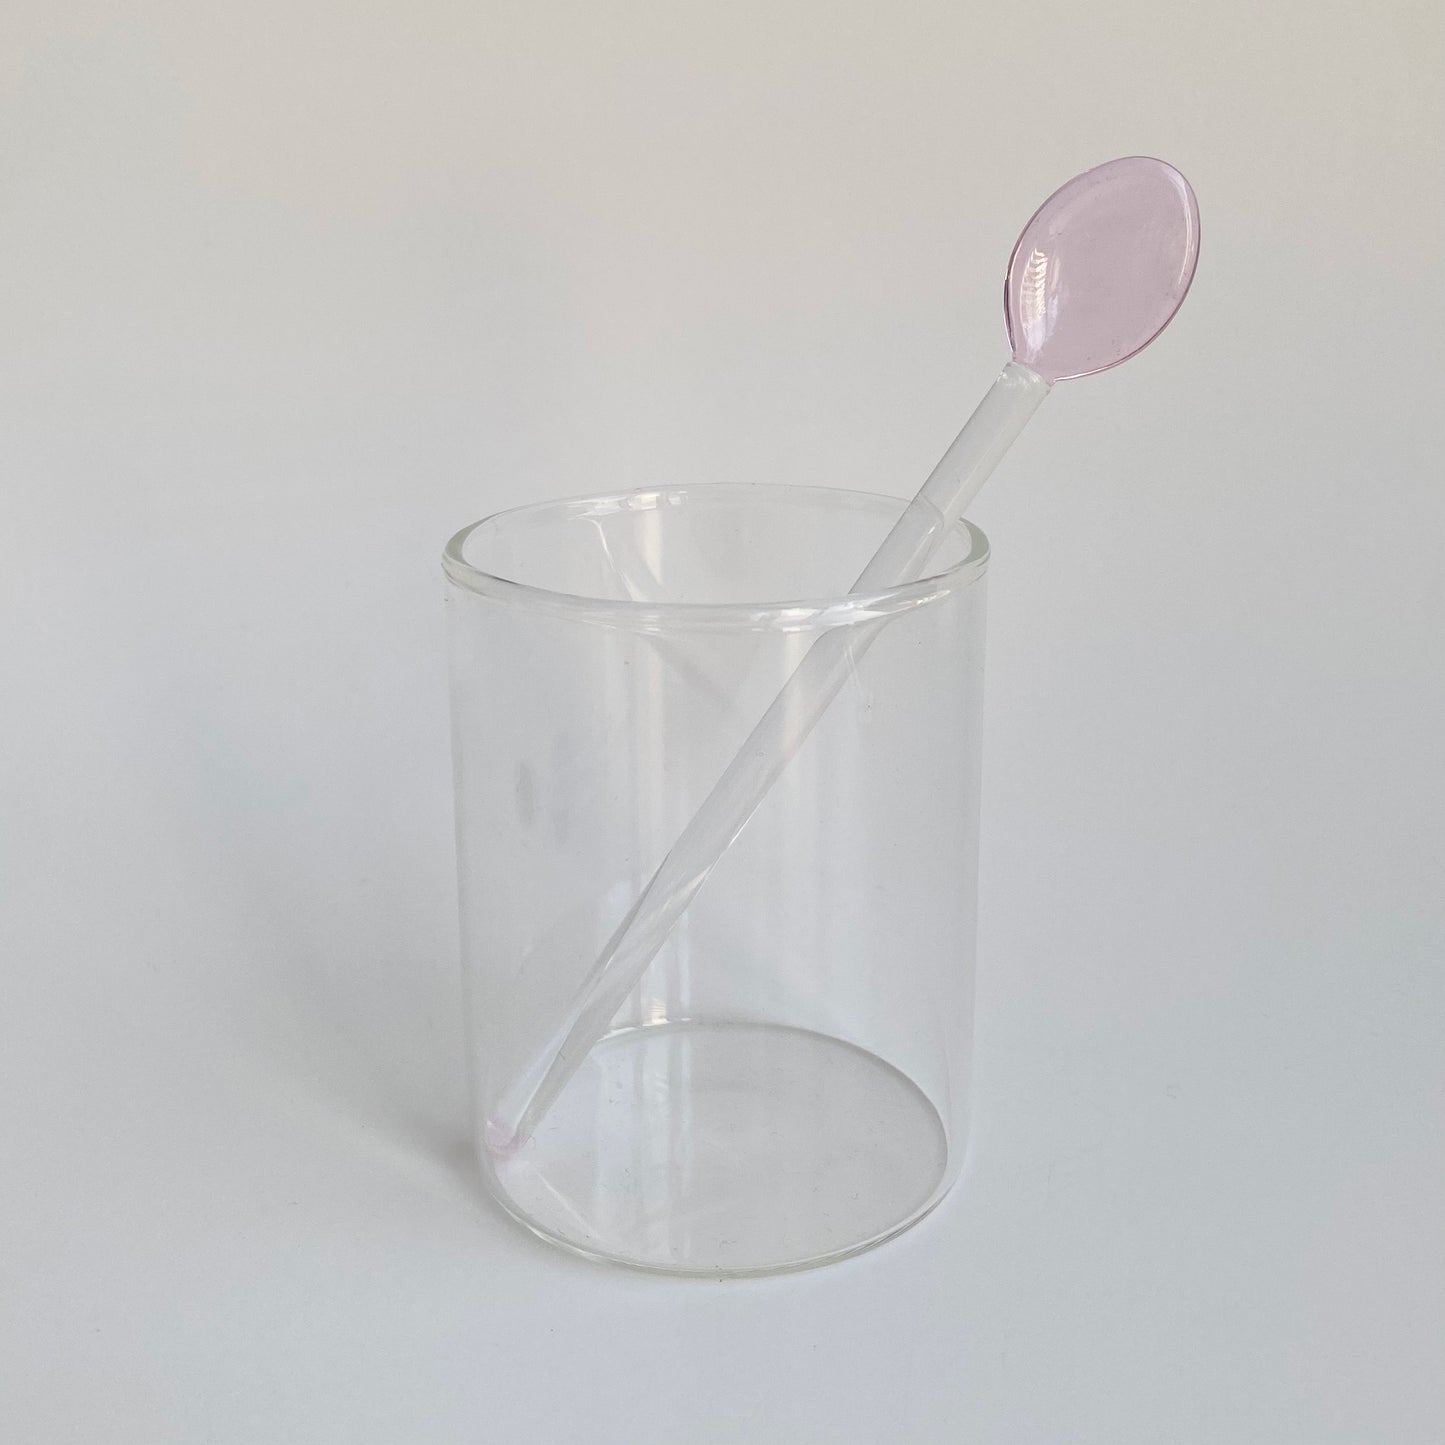 Glass Spoon & Coffee Stirrer in pink